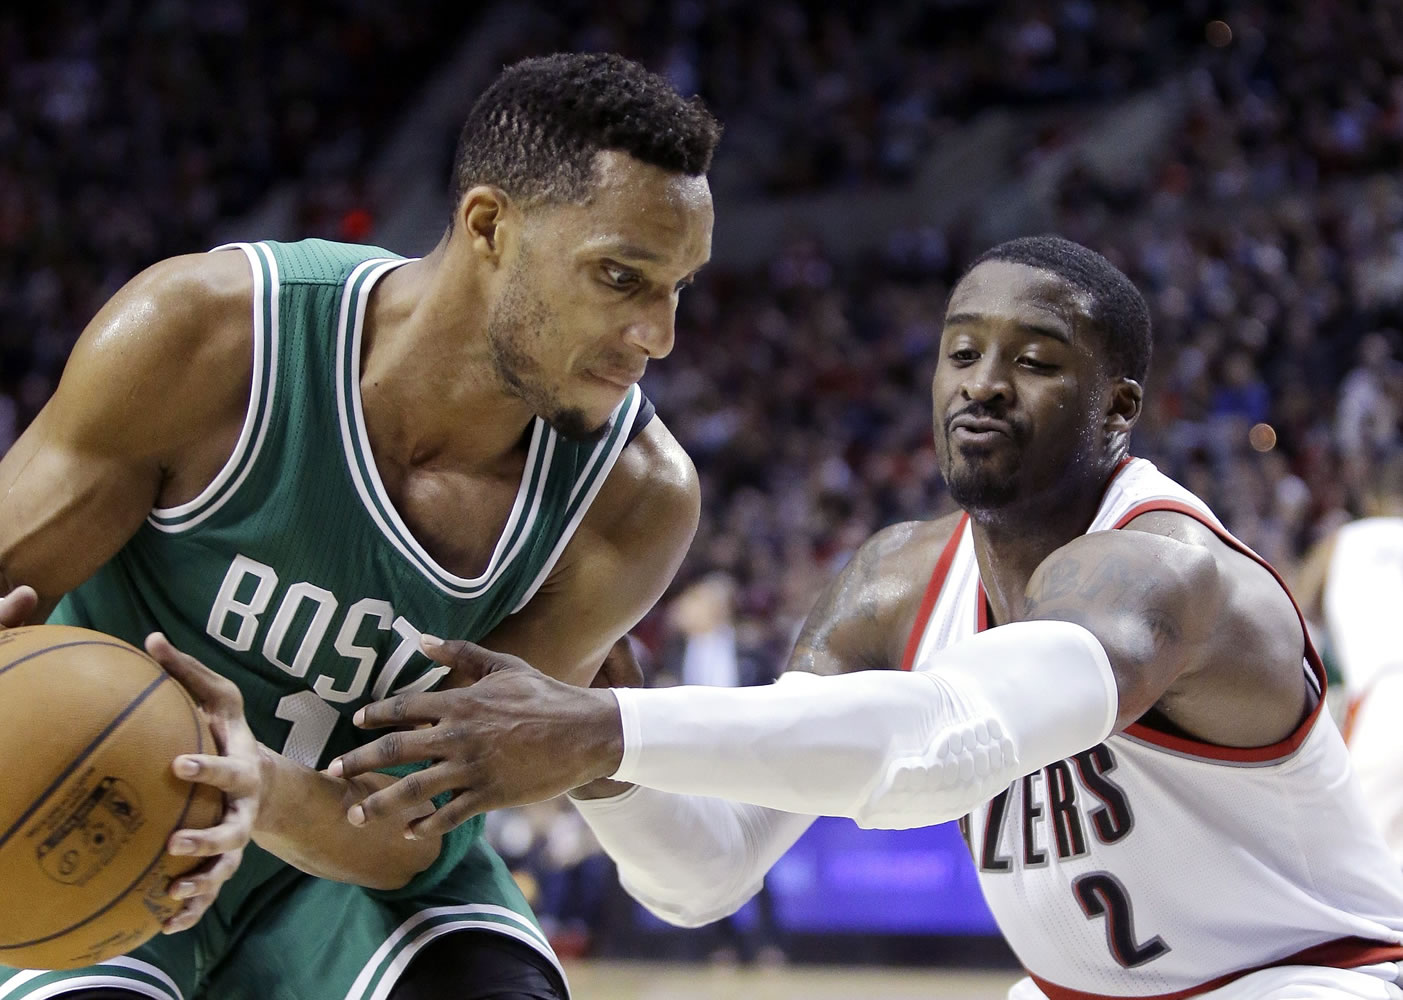 Boston Celtics guard Evan Turner, left, looks to maneuver against Portland Trail Blazers guard Wesley Matthews during the second half Thursday, Jan. 22, 2015. Turner scored 10 points, including the game-winning 3-pointer, in the Celtics' 90-89 victory.